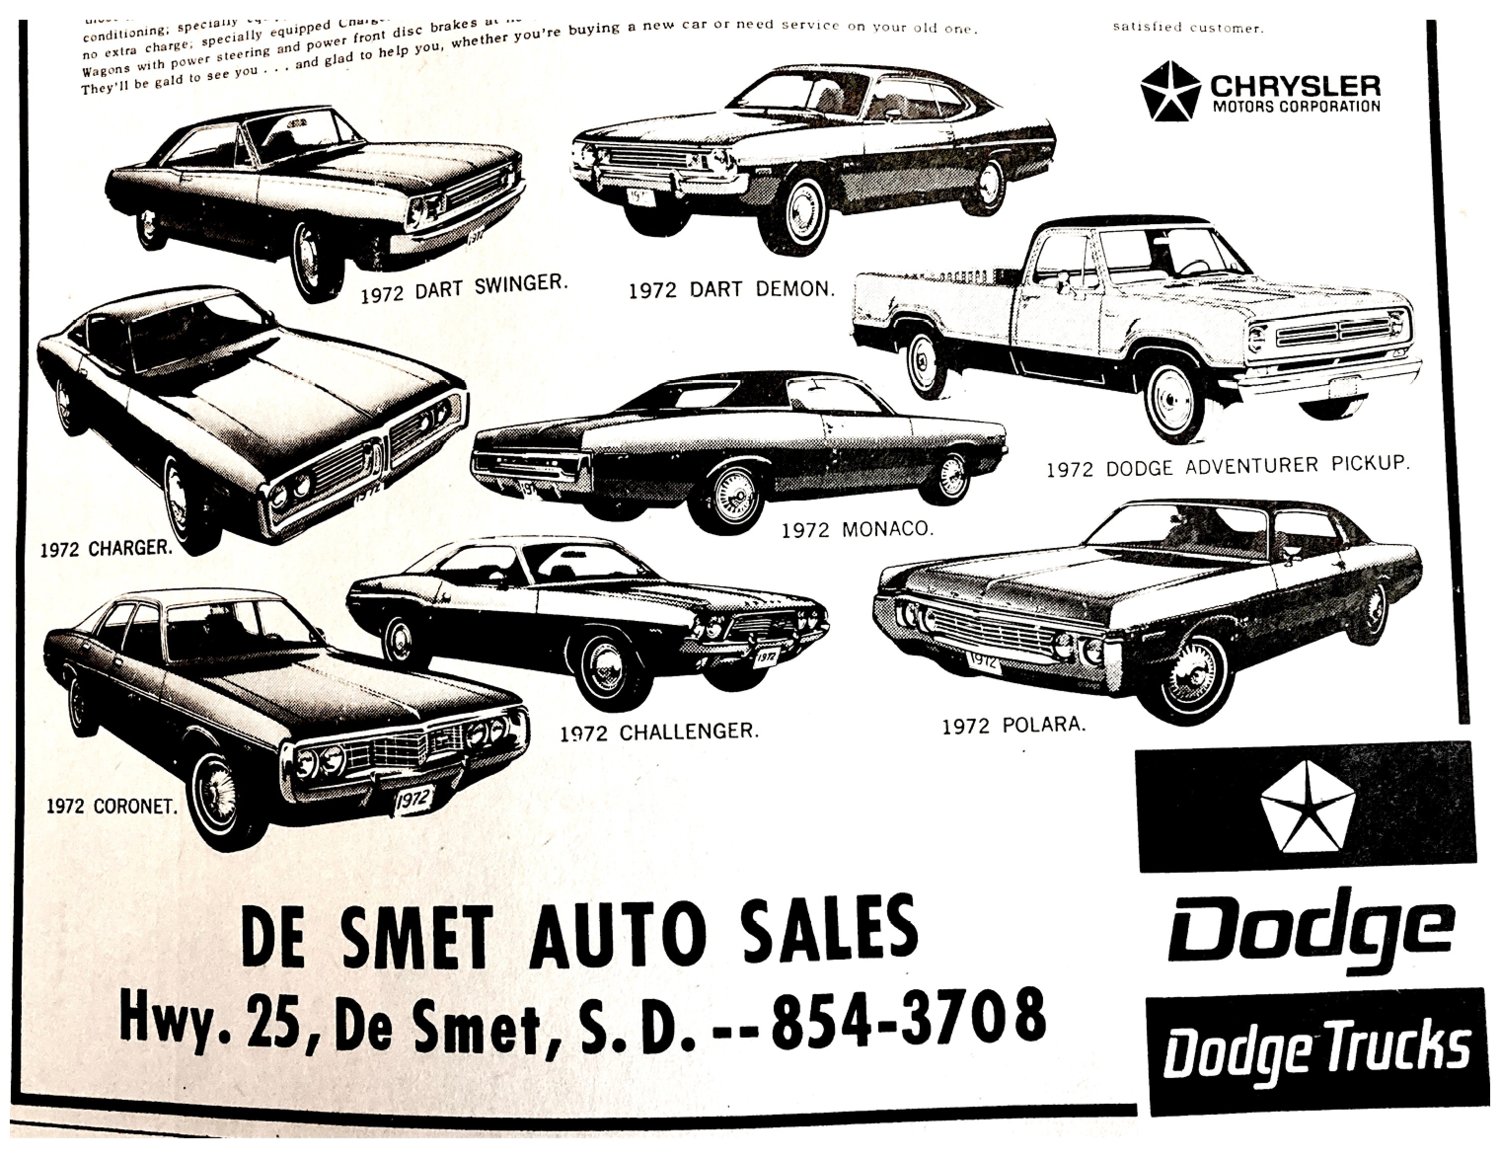 FIFTY YEARS AGO: These are some of the Dodge autos available in 1972 when Glenn Iverson opened De Smet Auto Sales.